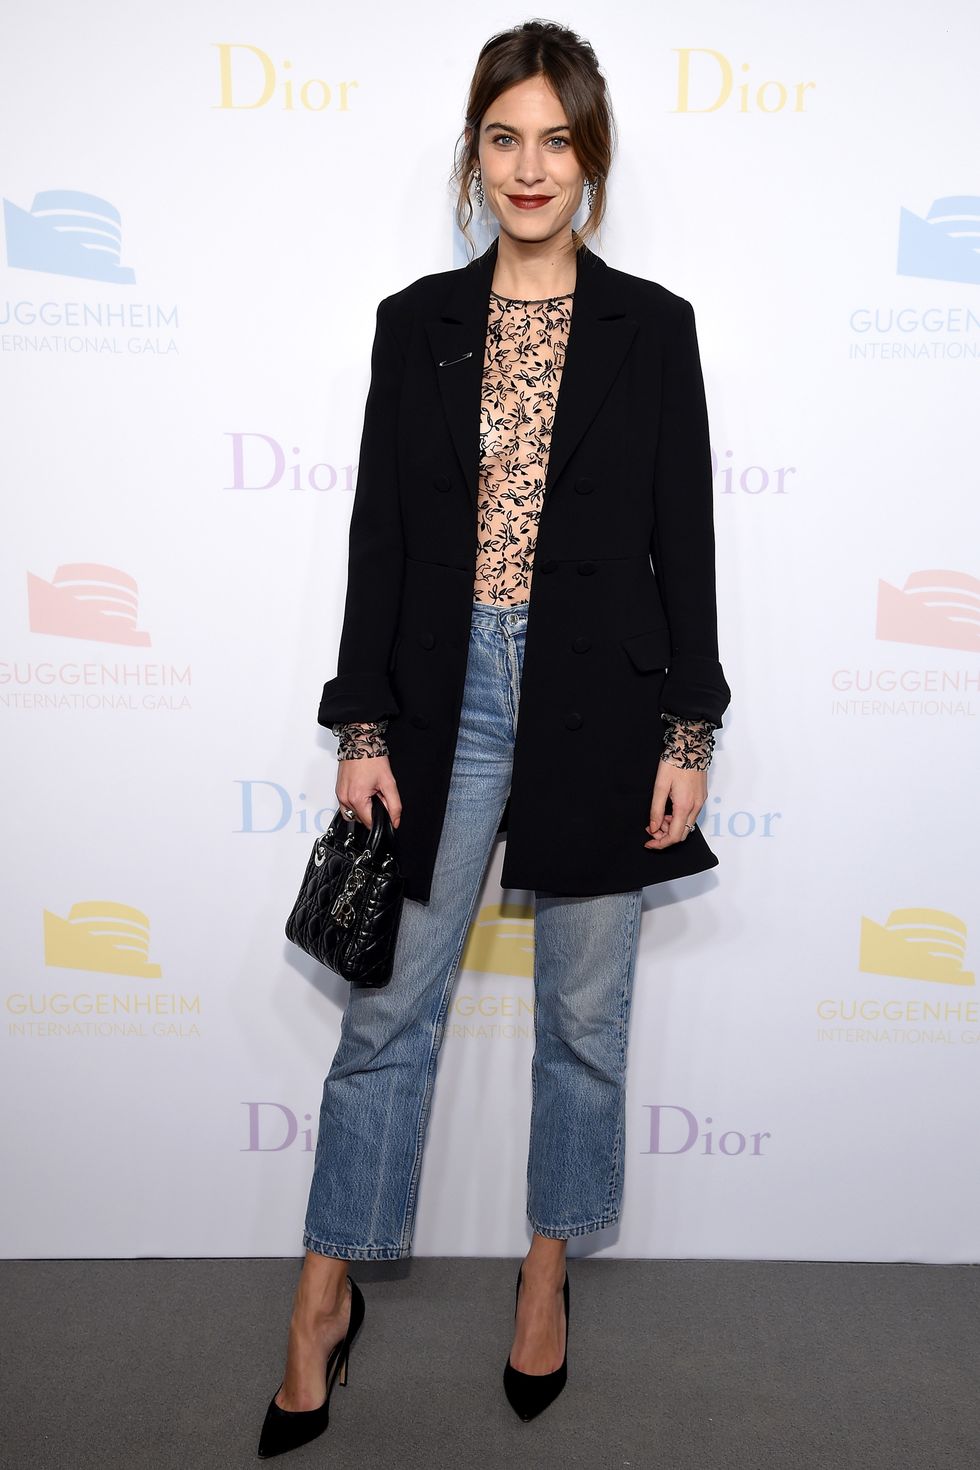 <p>Ispirati ad <strong data-redactor-tag="strong" data-verified="redactor">Alexa Chung</strong> e indossa&nbsp;una giacca oversize con i jeans&nbsp;e tacchi per un look serale easy.<span class="redactor-invisible-space" data-verified="redactor" data-redactor-tag="span" data-redactor-class="redactor-invisible-space"></span><span data-redactor-tag="span" data-verified="redactor"></span></p>